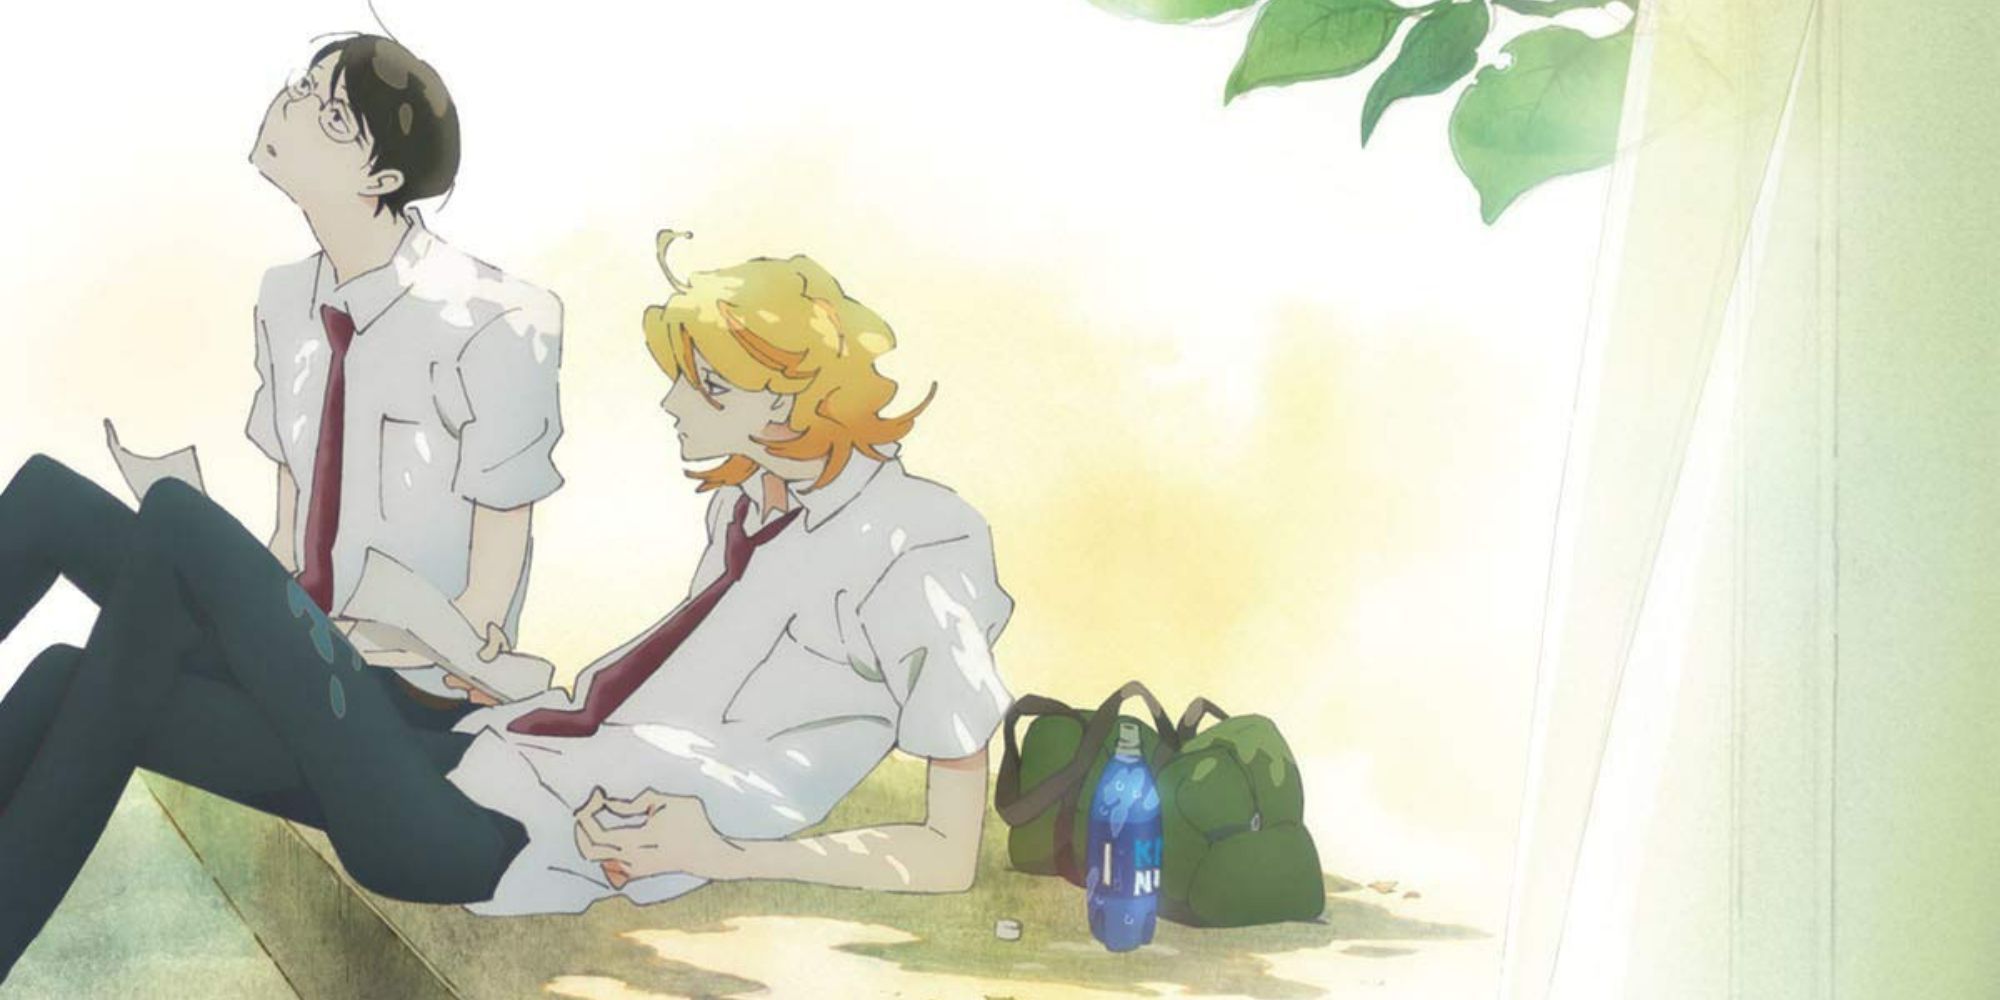 Two characters from Doukyusei: Classmates lounging outside